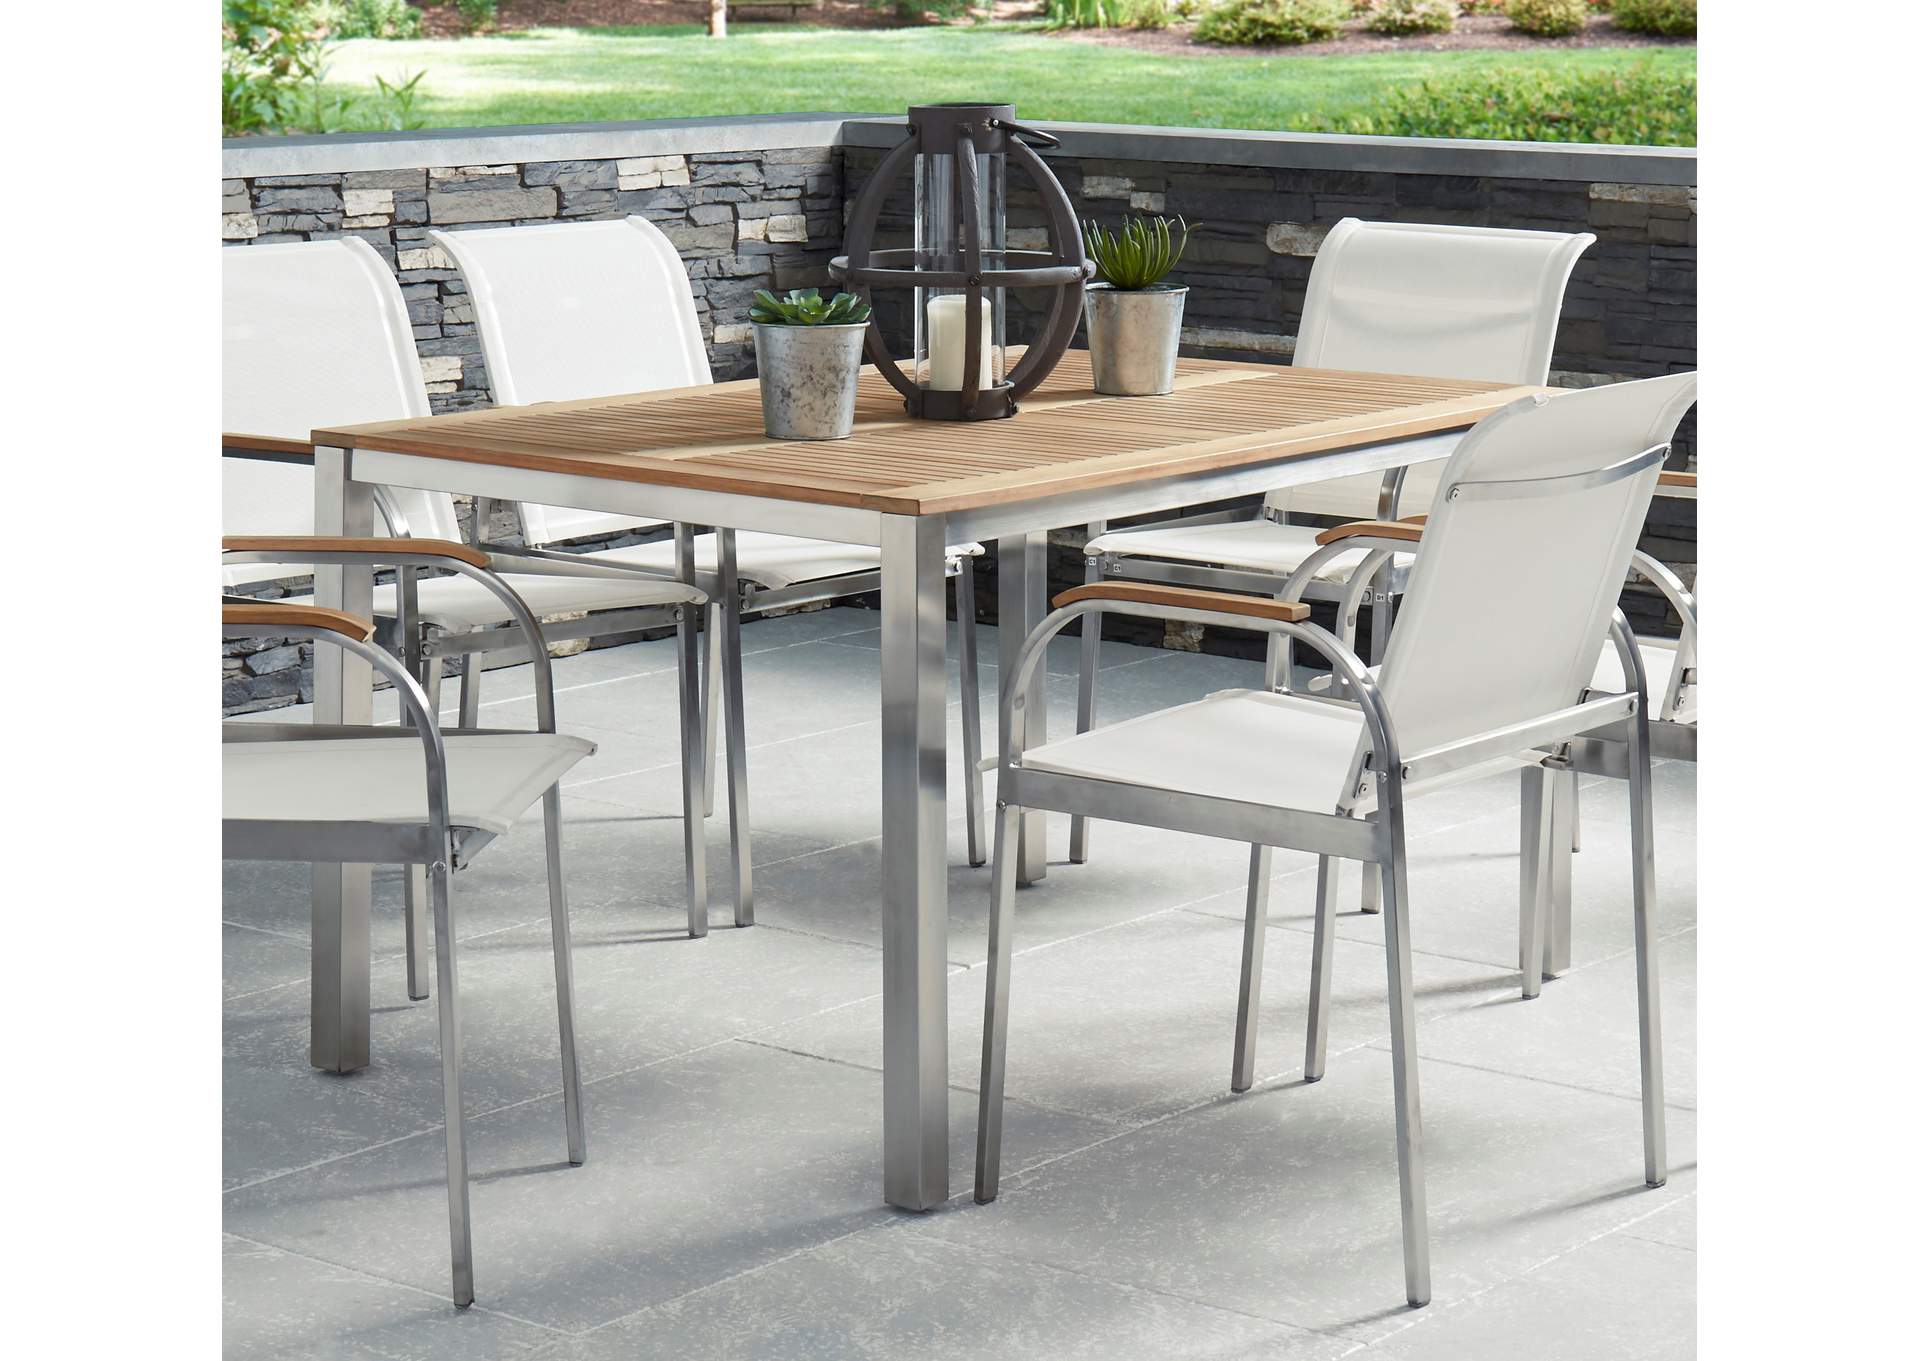 Aruba Outdoor Dining Table By Homestyles,Homestyles